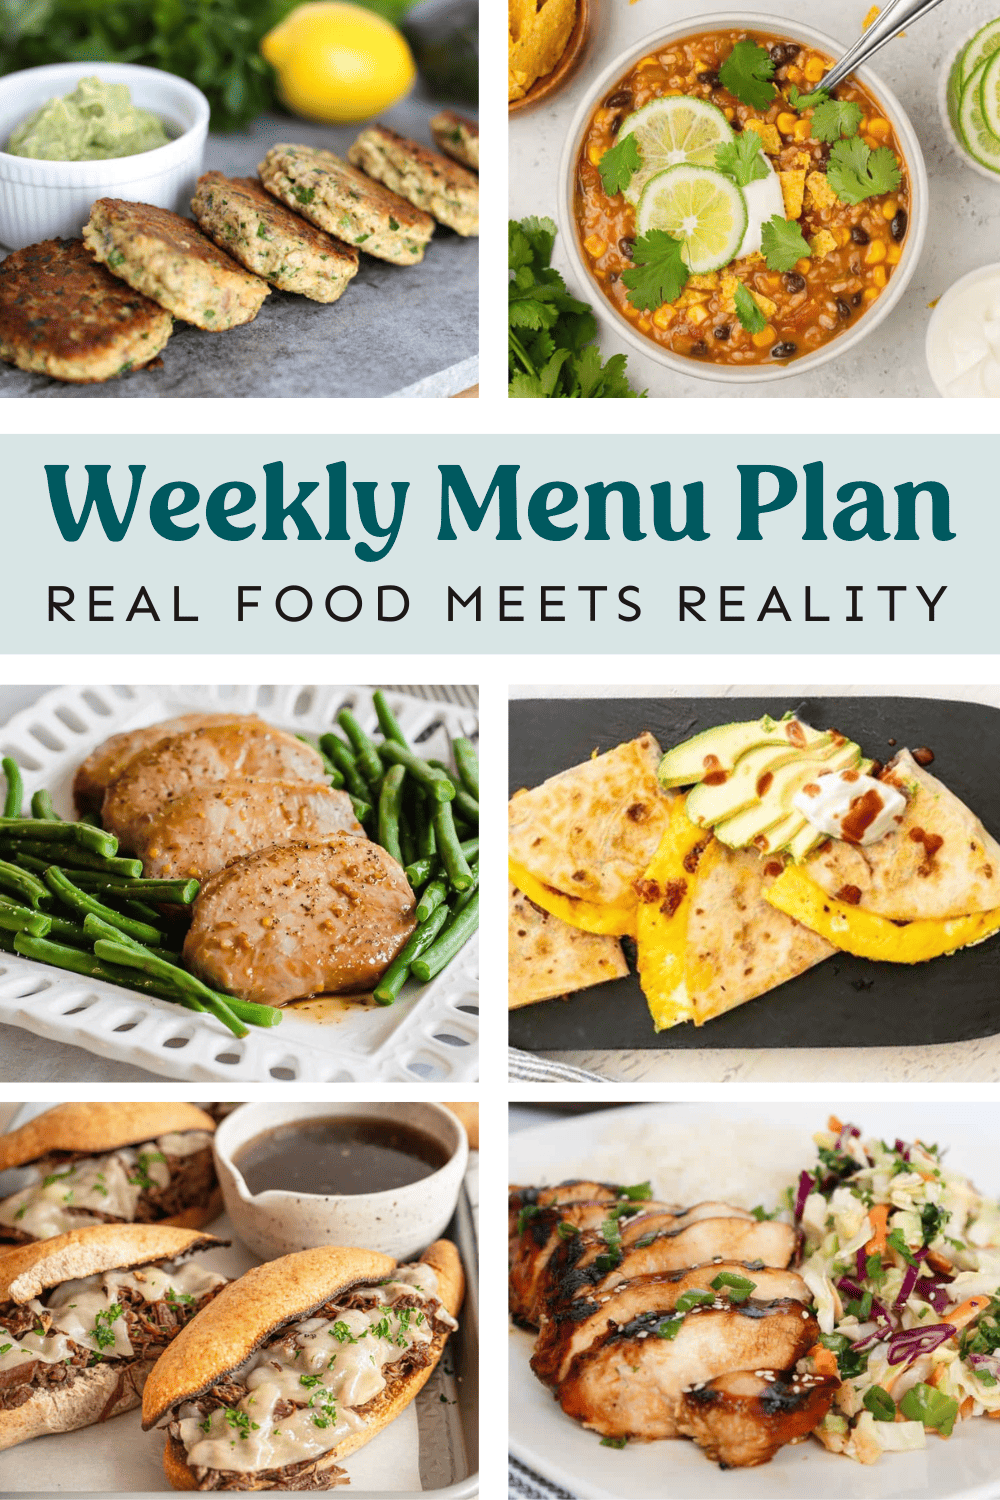 Collage or meals from the meal plan.